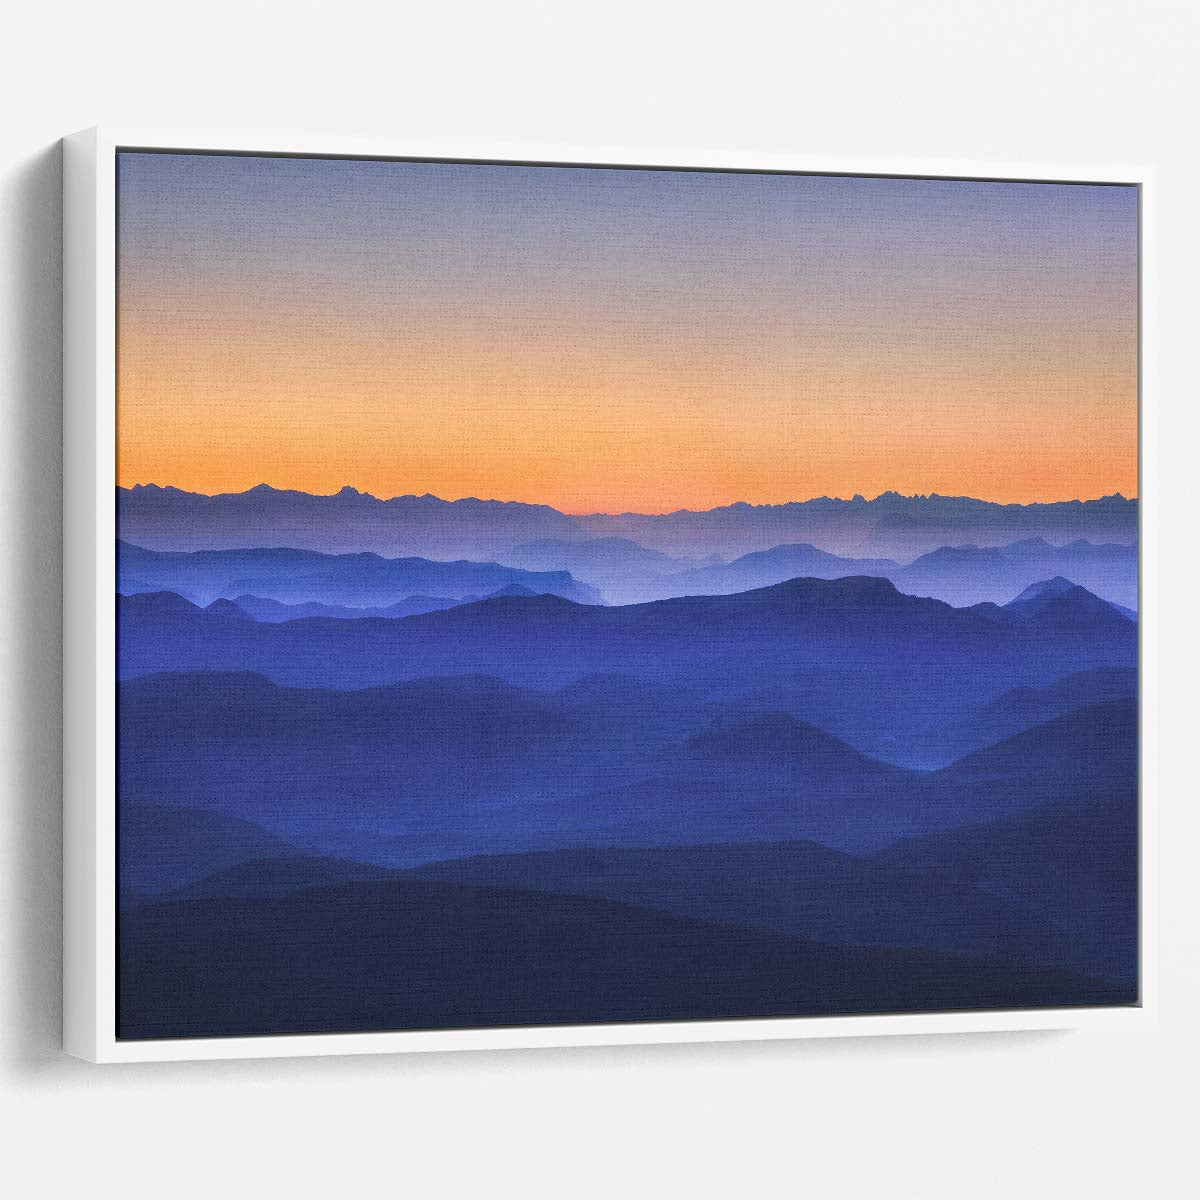 Misty Blue Mountain Layers Sunset View Wall Art by Luxuriance Designs. Made in USA.